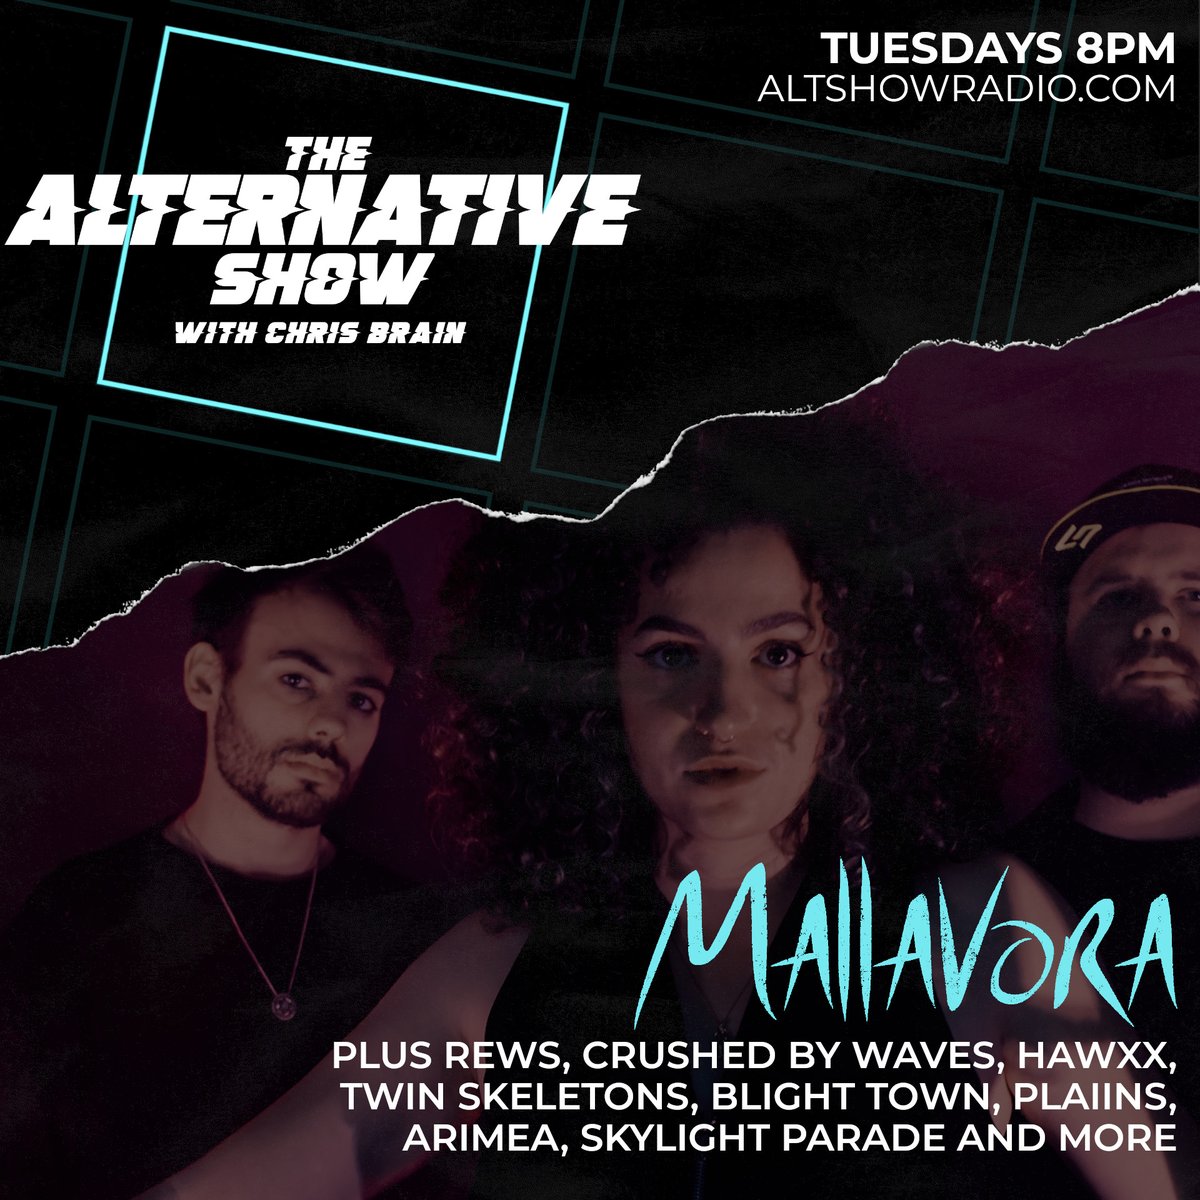 💥TUESDAY 8PM ALTSHOWRADIO.COM💥
This week I'm joined by Jess from Mallavora, NEW FEATURE; This weeks HOTTEST TRACK from @ARIMEA_UK  - Seriously can't get their new song out of my head and you won't be able to either! Plus all these HUGE TUNES! 

#alternative #emo #radio